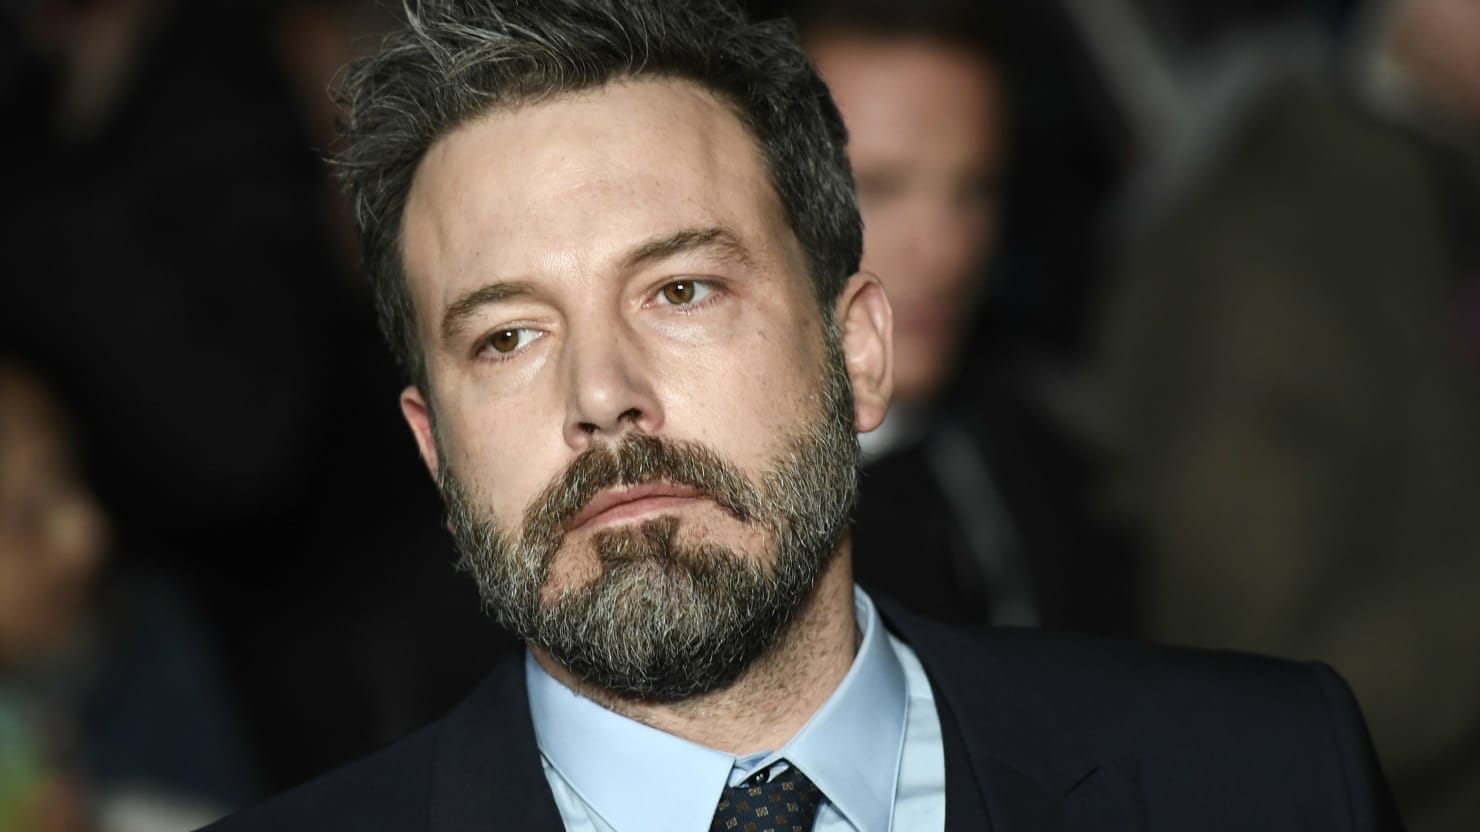 Ben Affleck: ‘I Sincerely Apologize’ for Groping Hilarie Burton in 2003